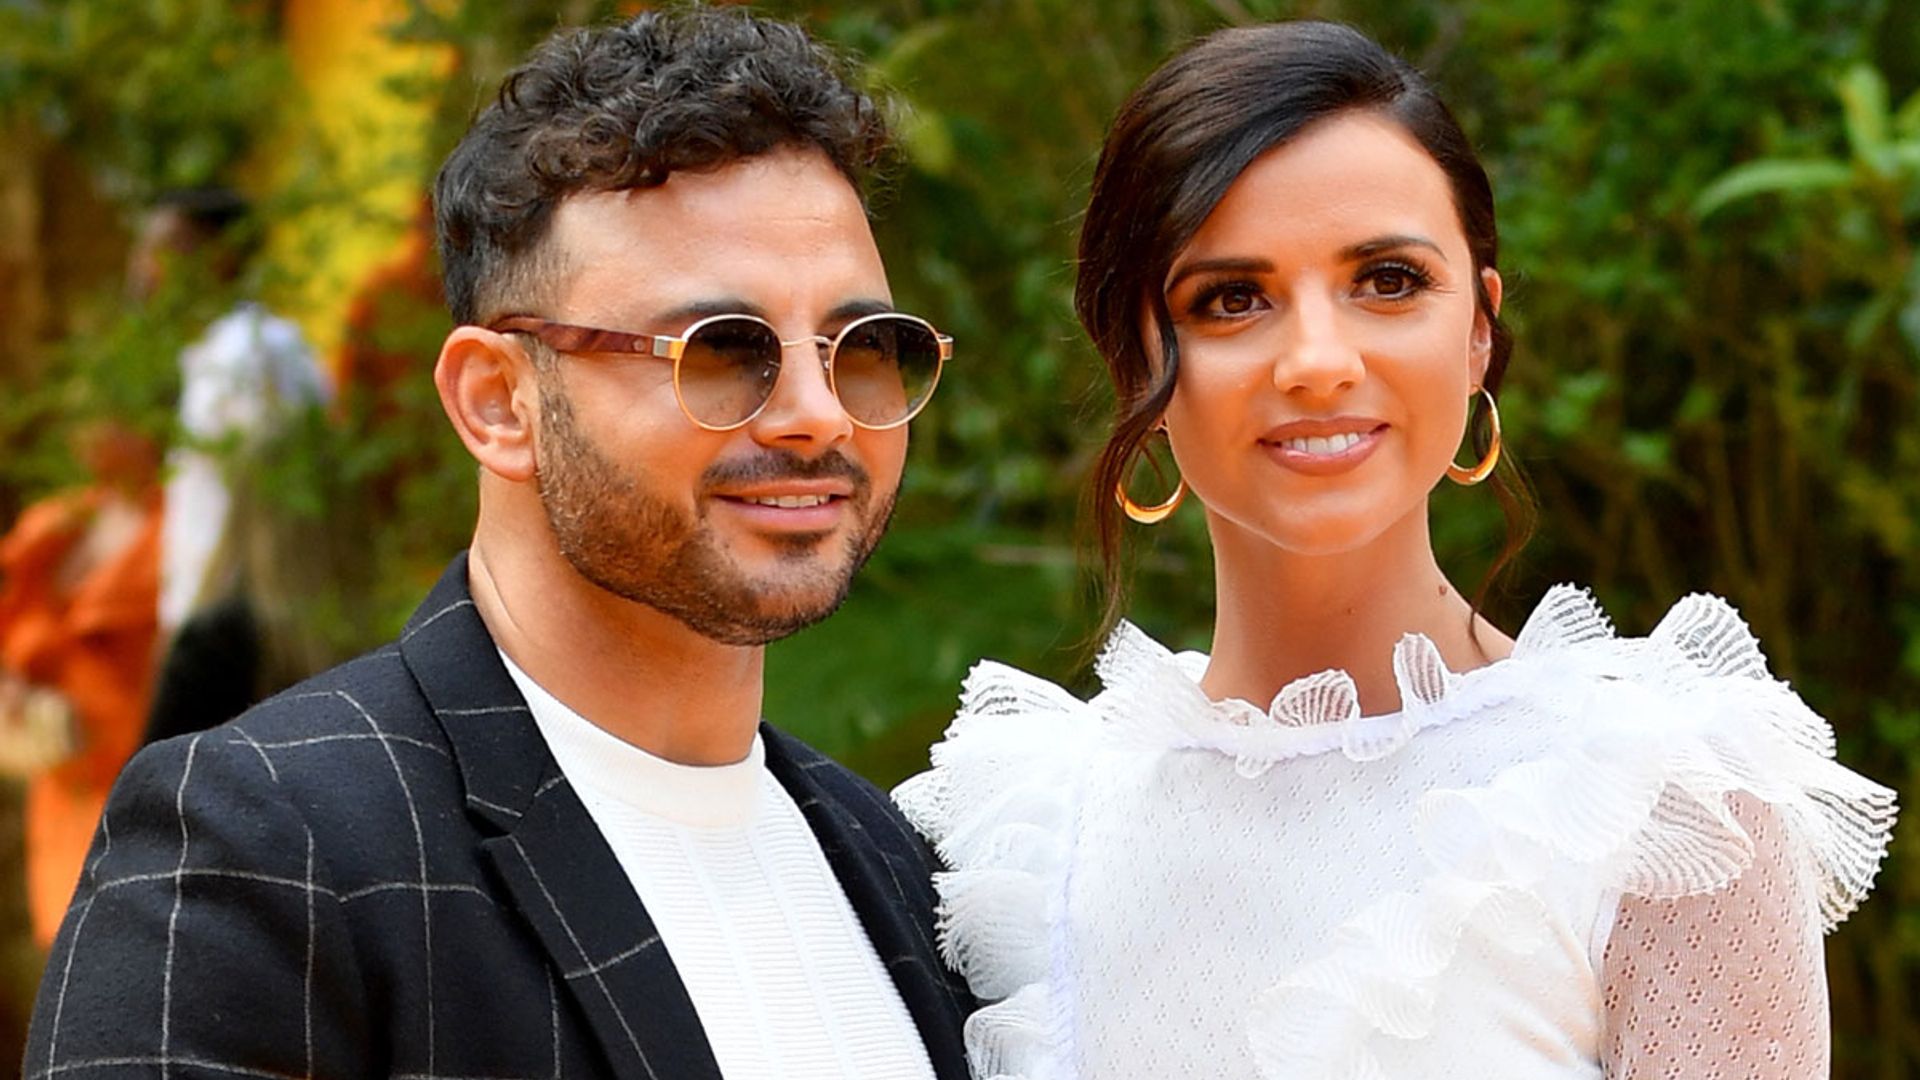 Lucy Mecklenburgh and Ryan Thomas welcome second baby together - see first photo